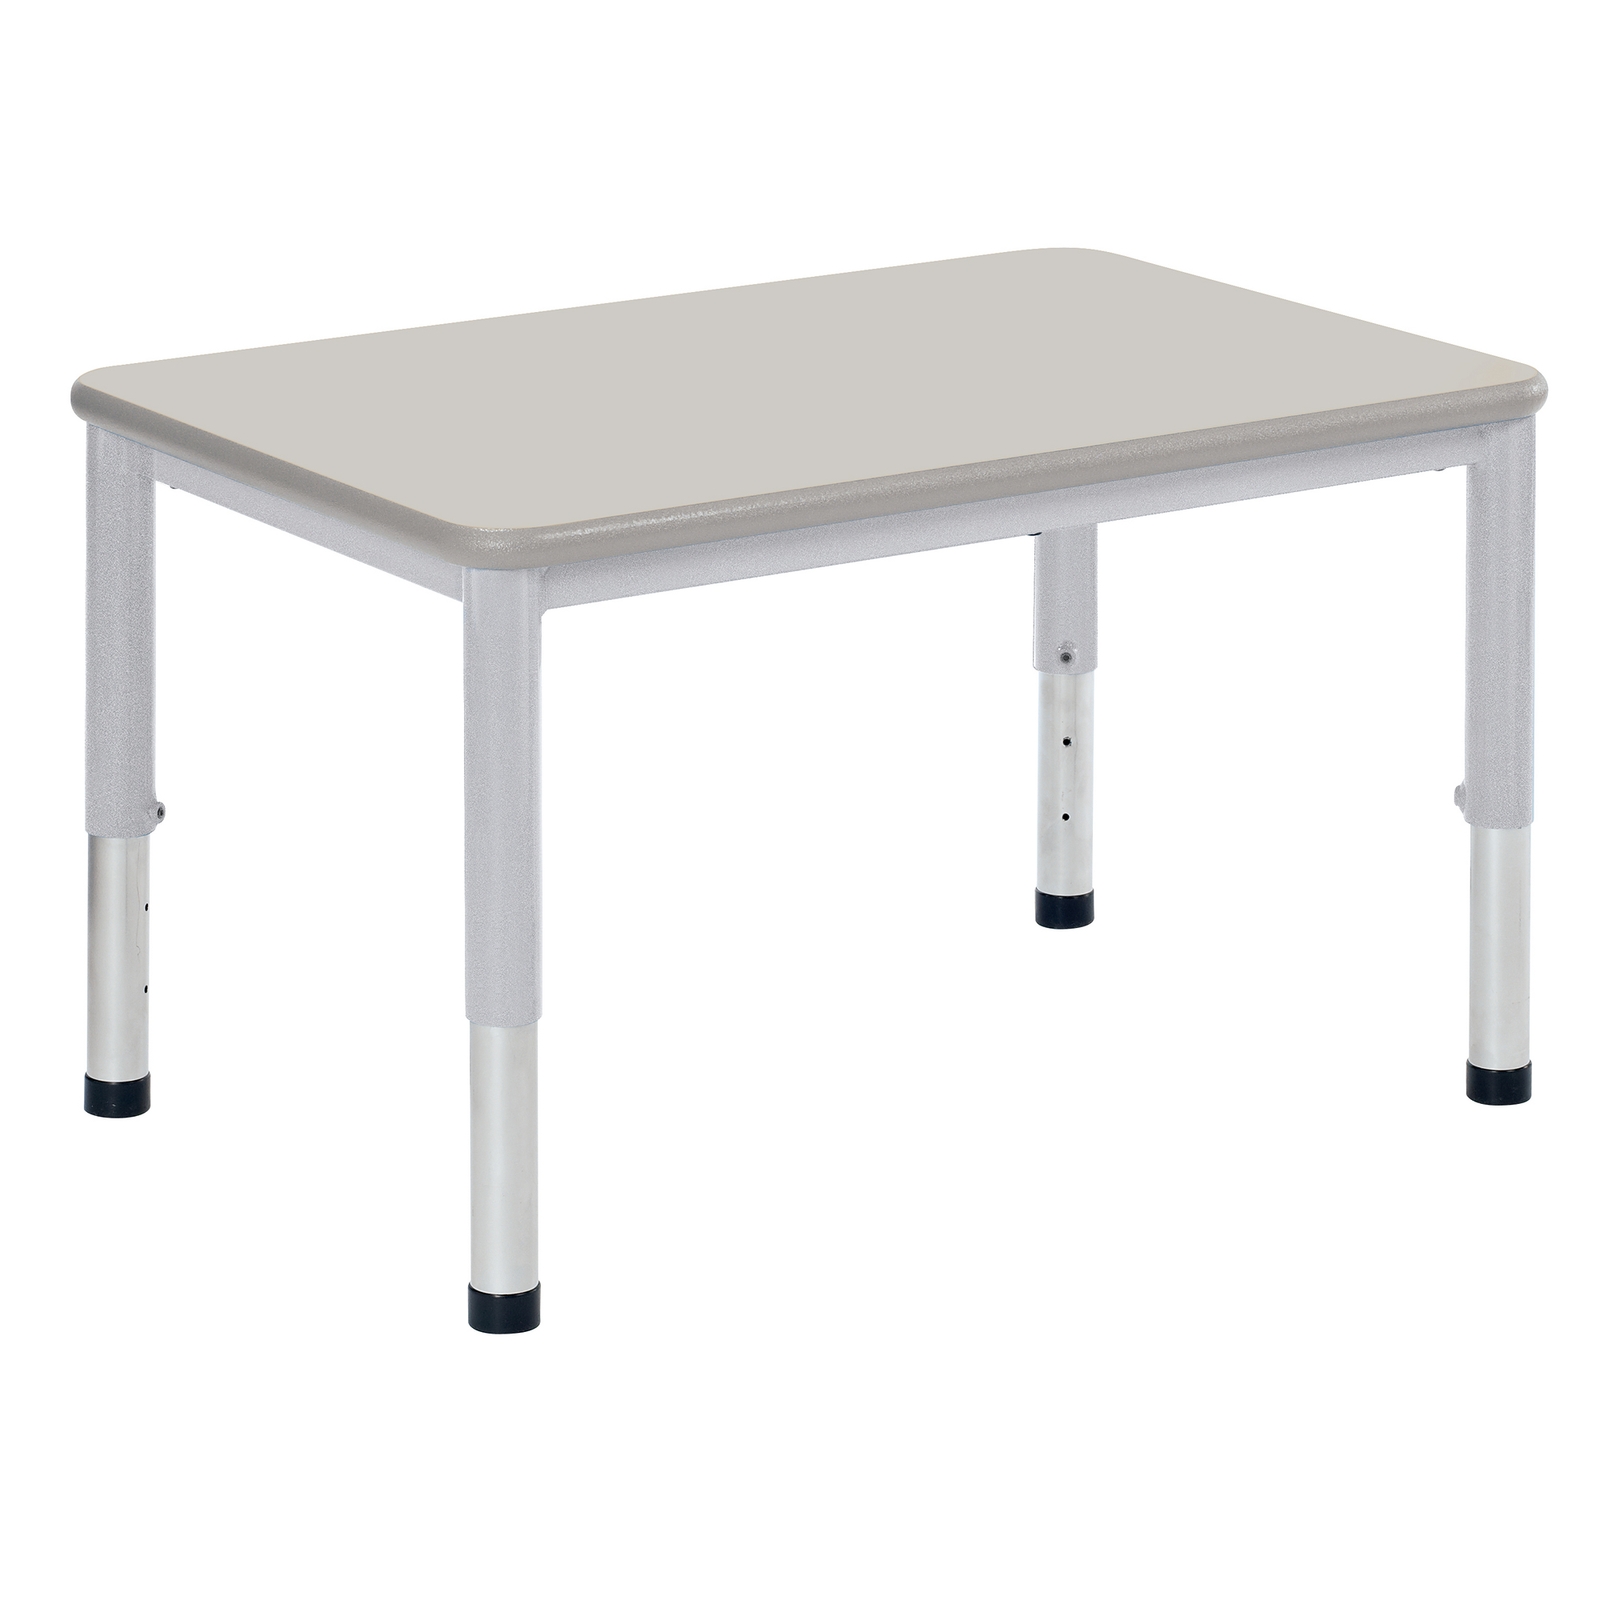 Harlequin Small Rect Table Grey